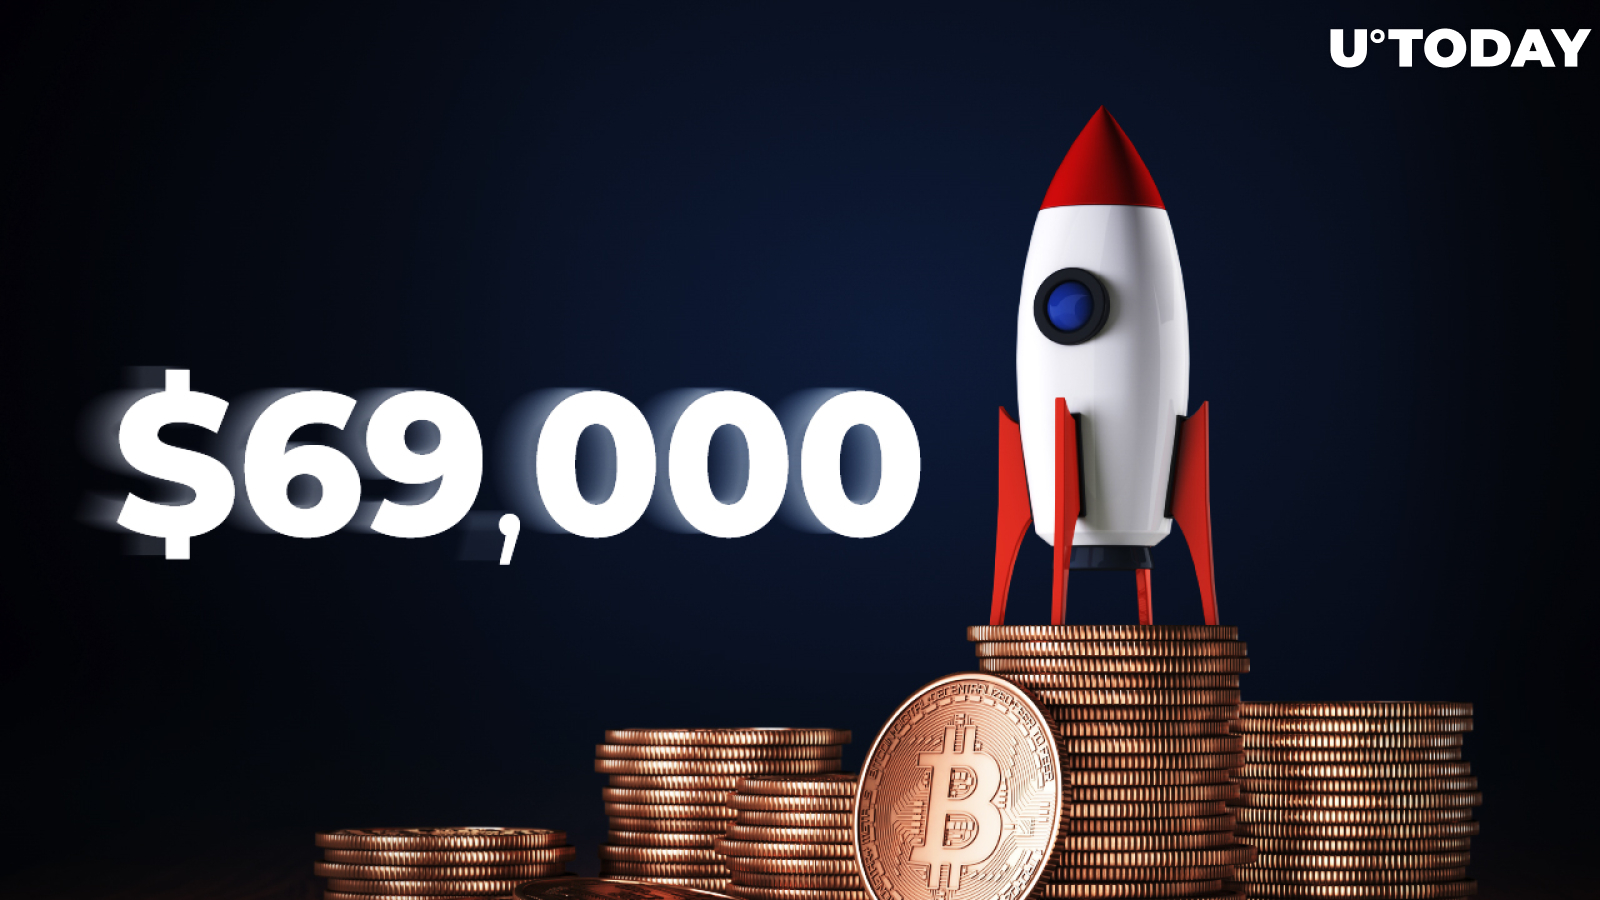 Bitcoin Touches $69K for the First Time